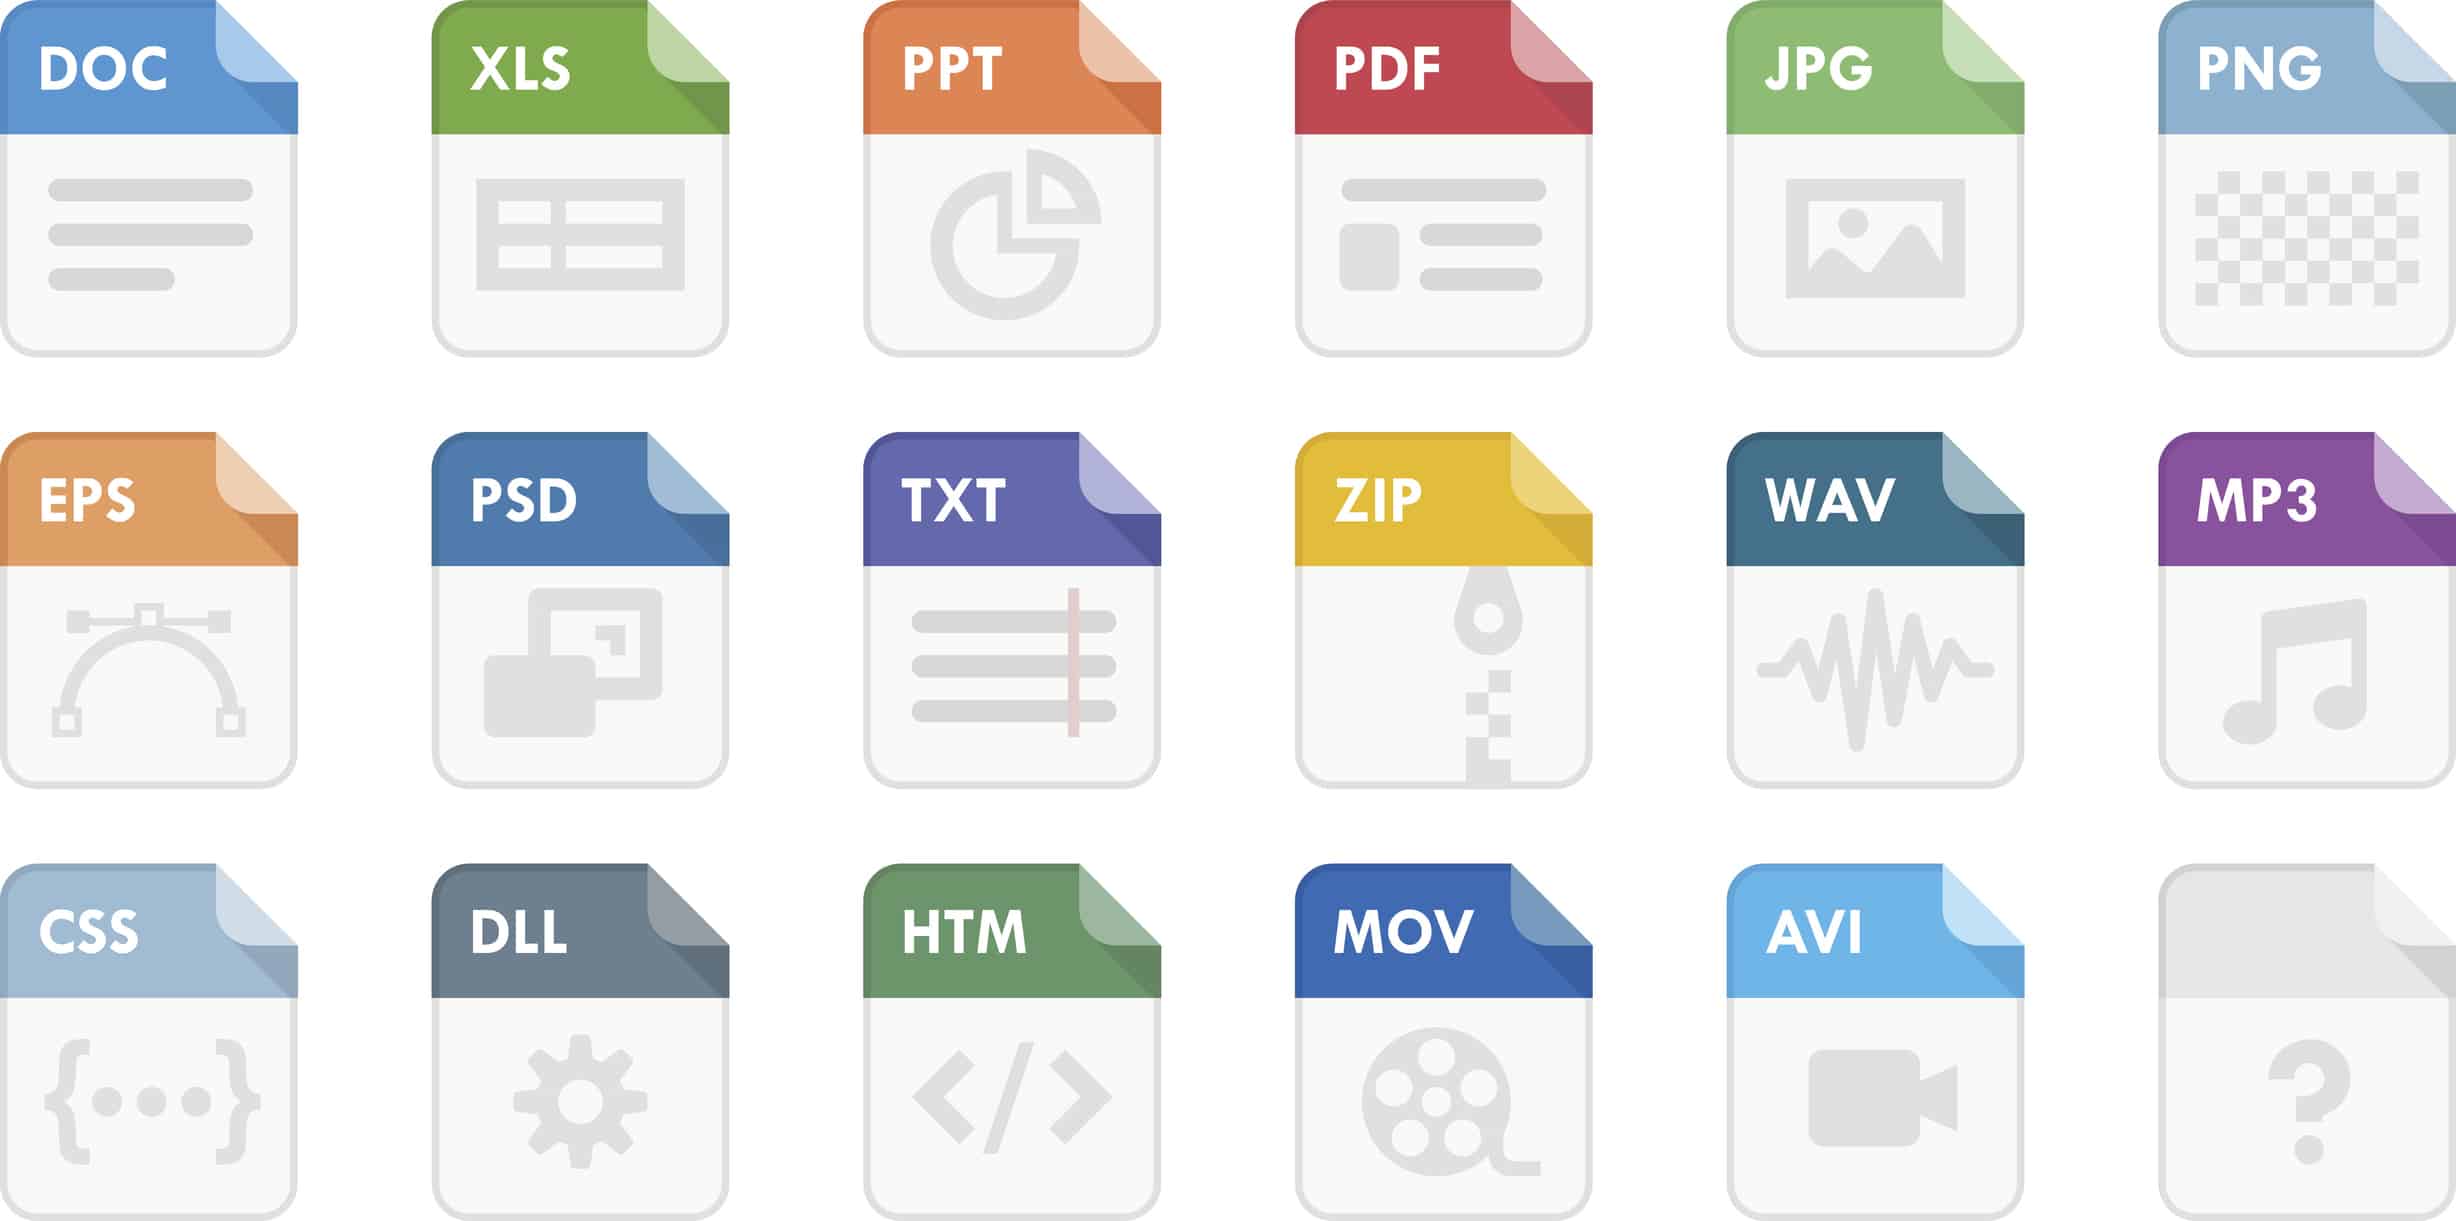 The Giant List of Document File Types and Extensions